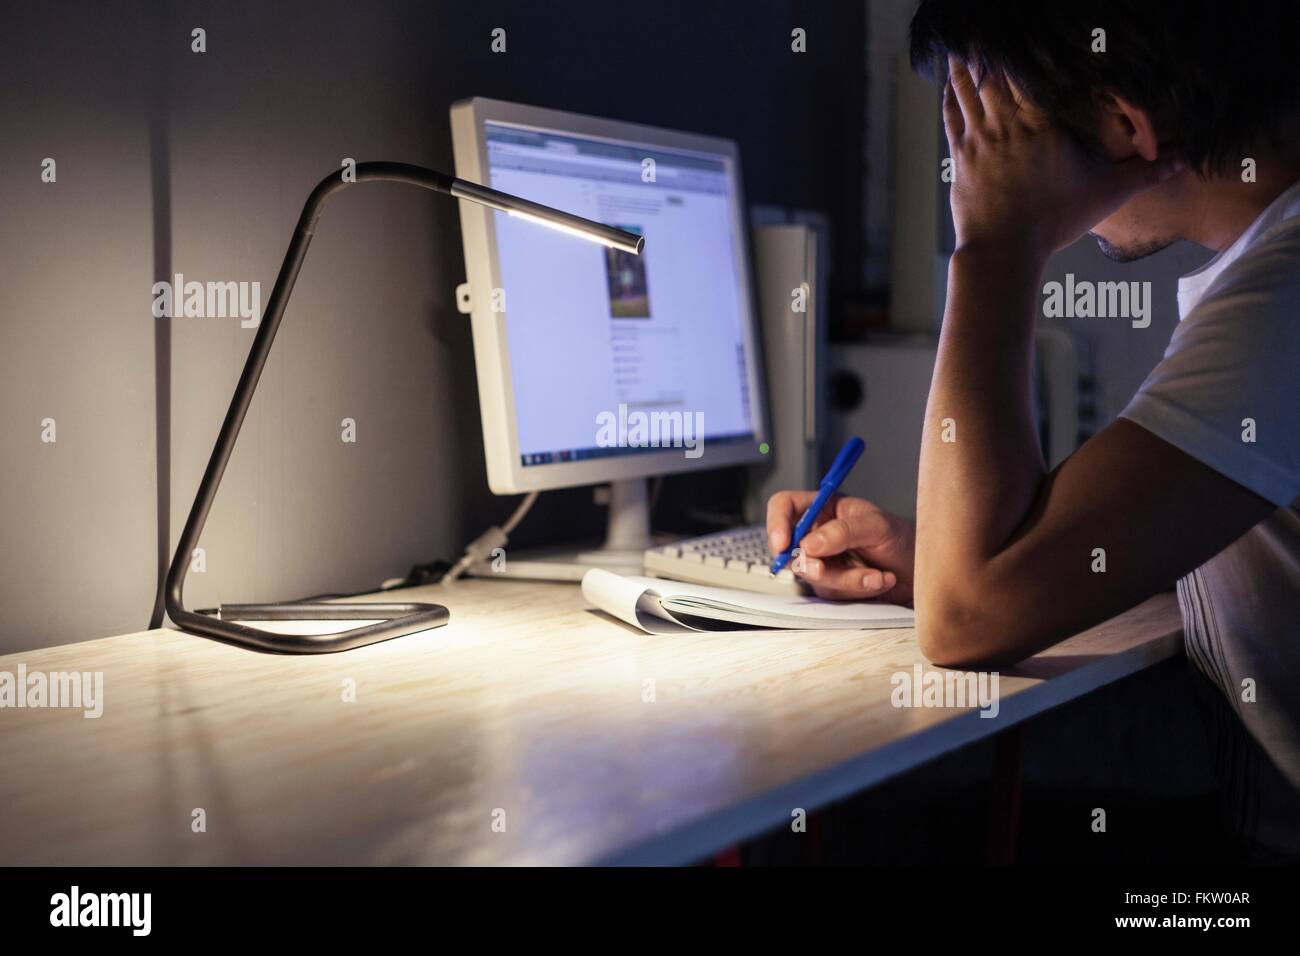 Tired man using desktop computer and making notes Stock Photo